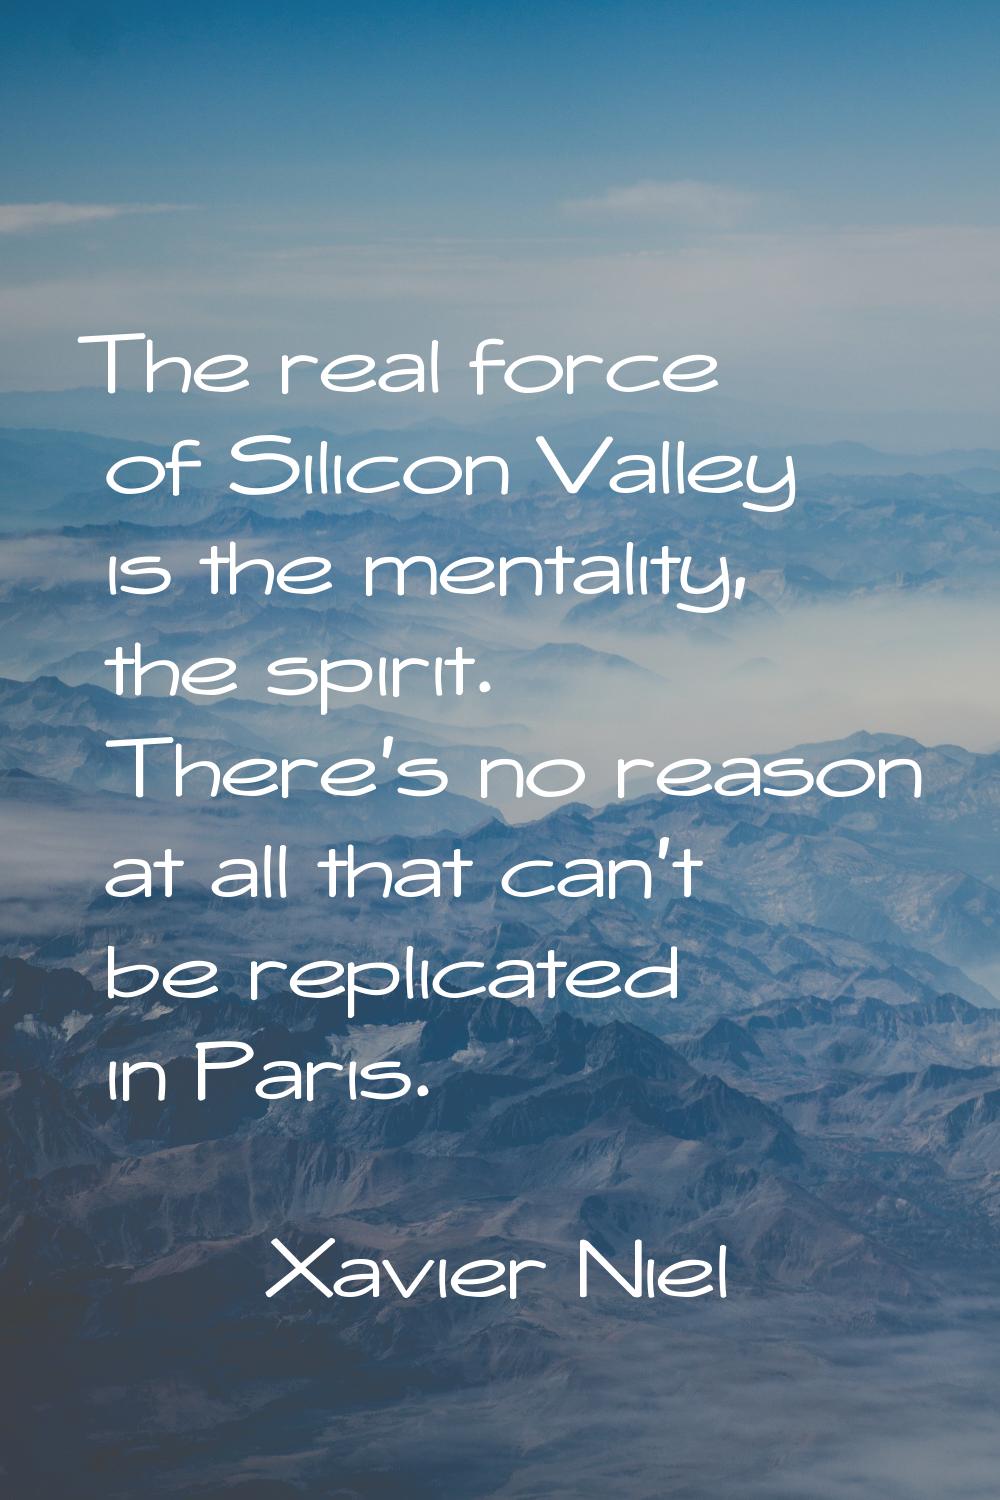 The real force of Silicon Valley is the mentality, the spirit. There's no reason at all that can't 